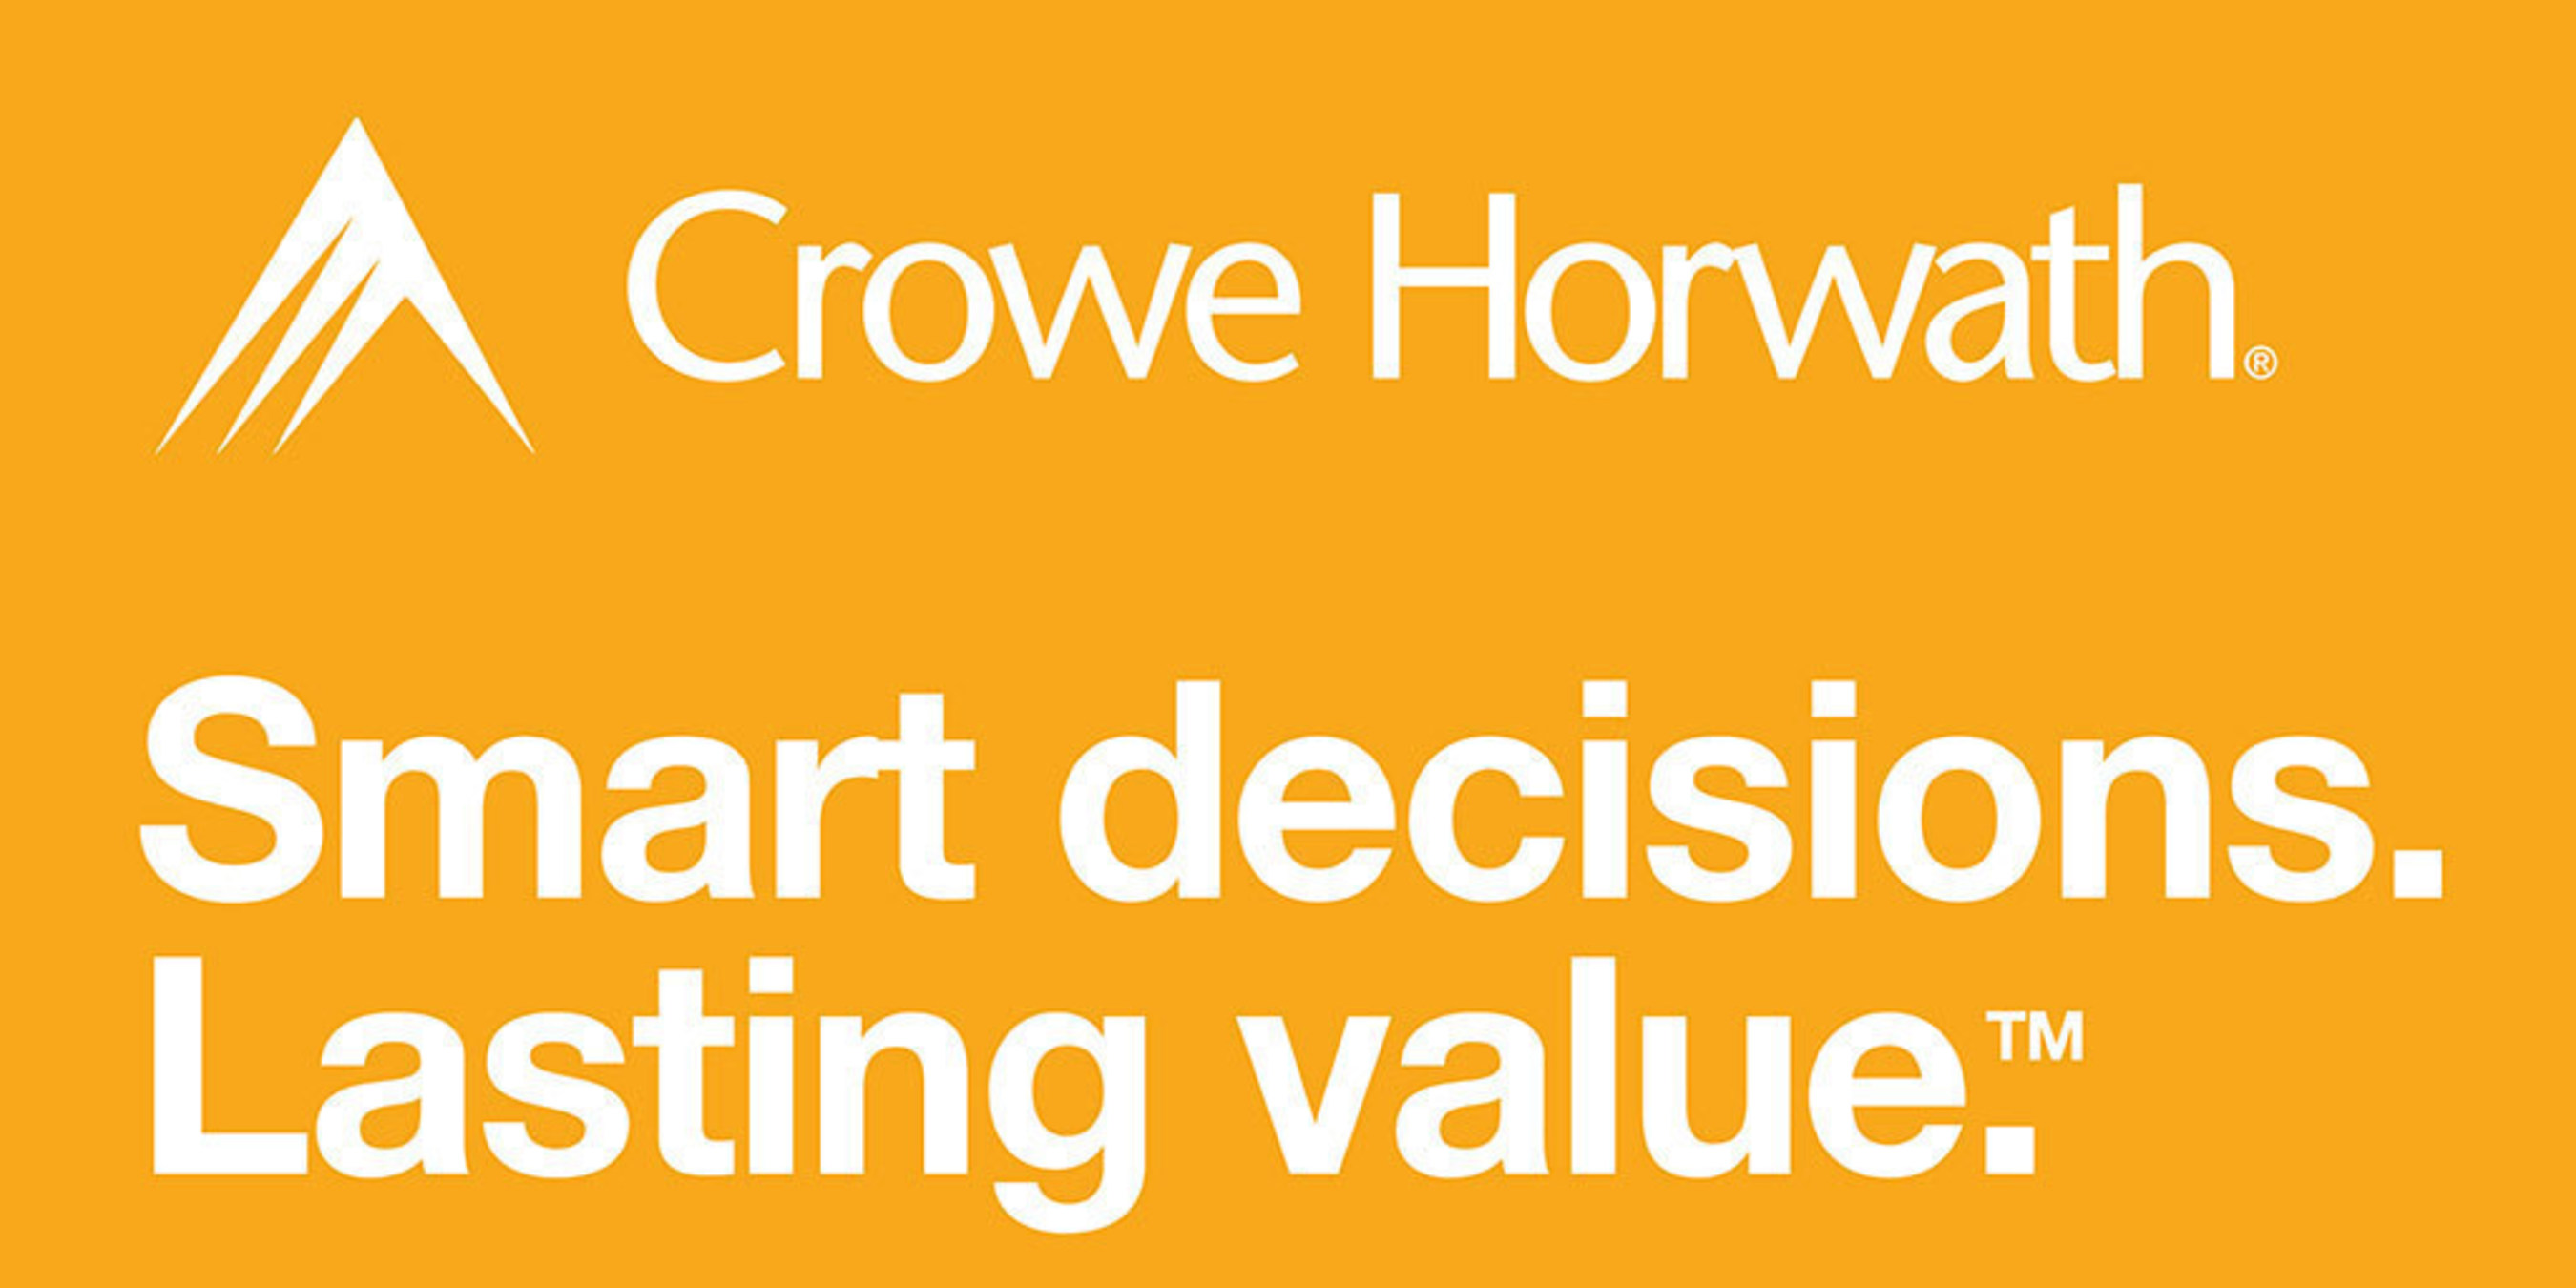 Crowe Horwath LLP, one of the largest public accounting, consulting and technology firms in the U.S., has unveiled a new brand platform: Smart decisions today. Lasting value tomorrow.